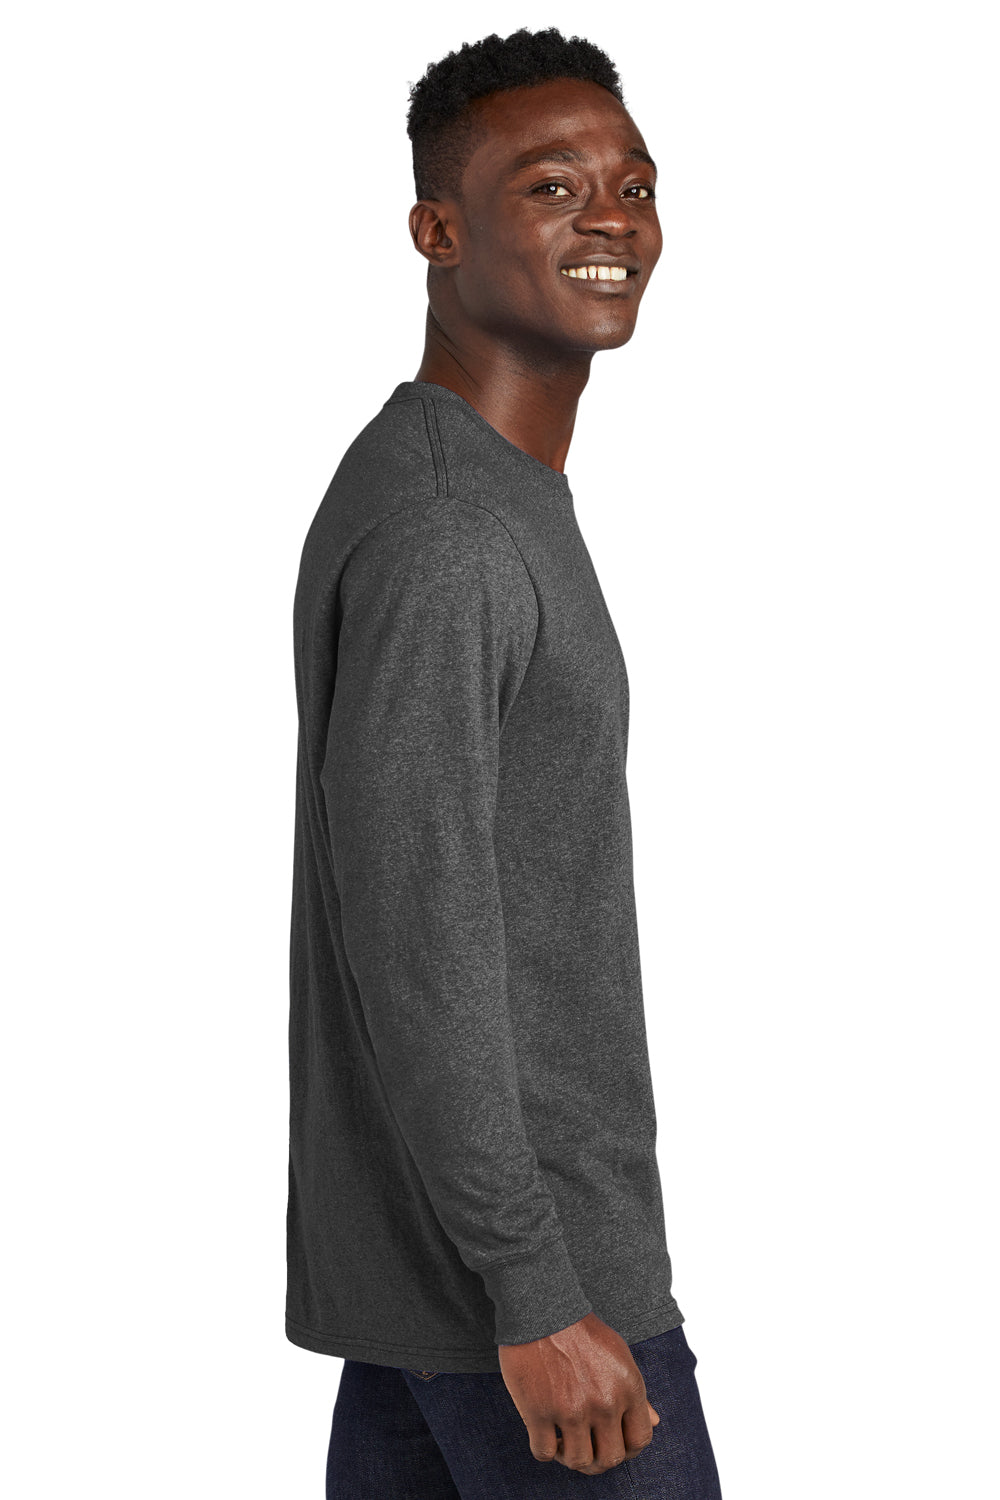 Allmade AL6204 Mens Recycled Long Sleeve Crewneck T-Shirt Heather Charcoal Grey Model Side